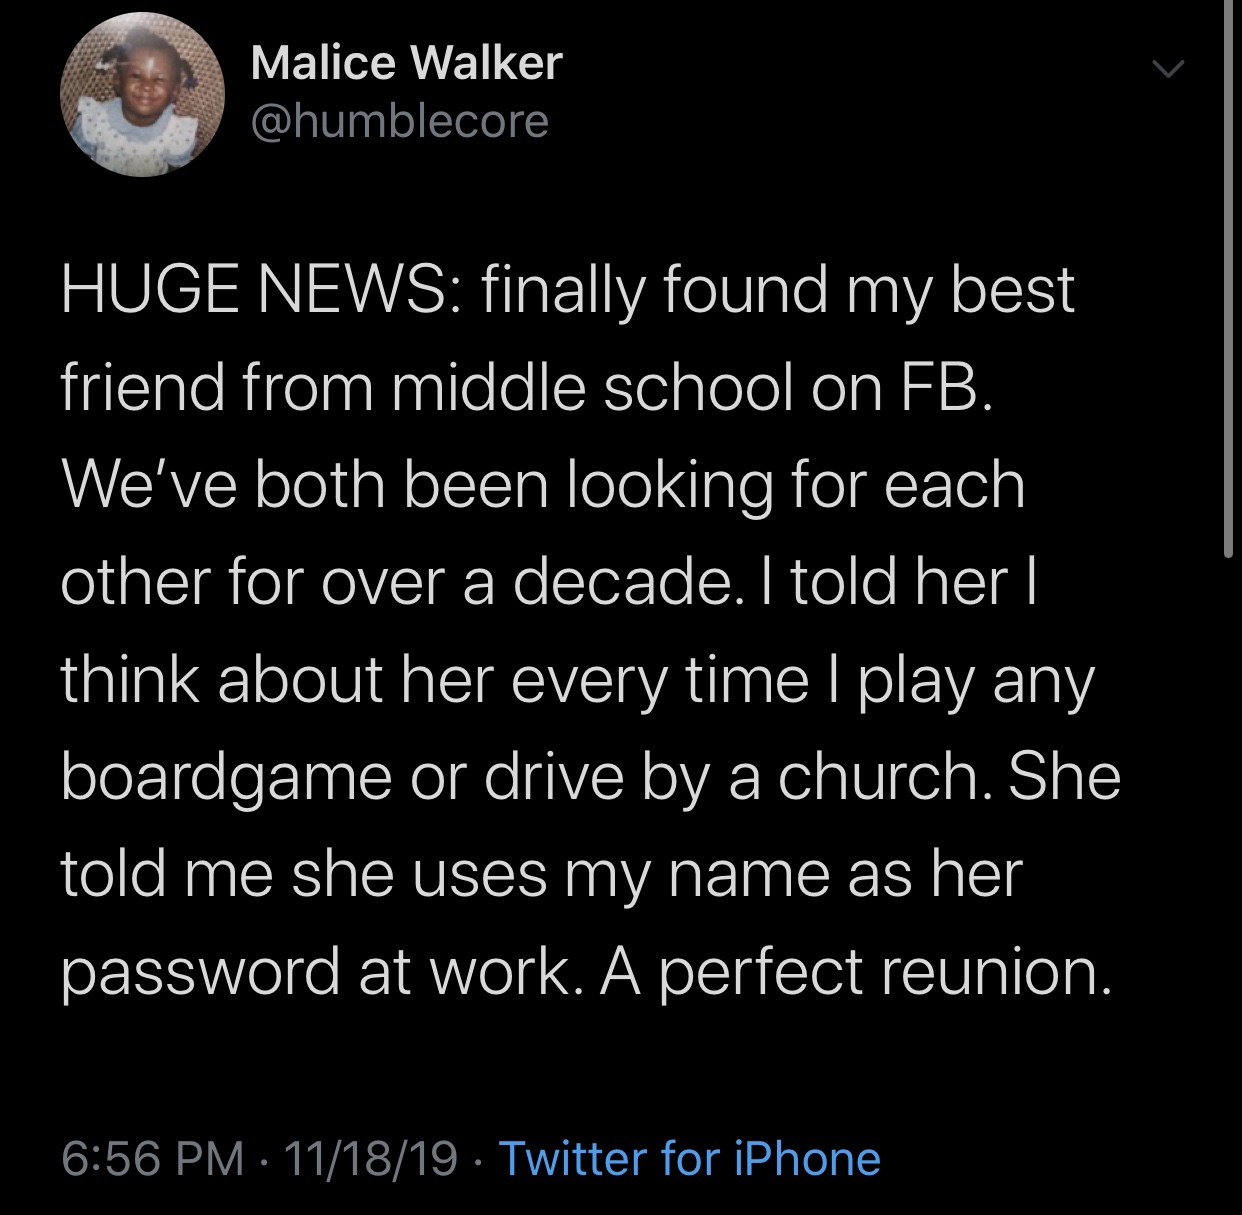 wholesome meme - atmosphere - Malice Walker Huge News finally found my best friend from middle school on Fb. We've both been looking for each other for over a decade. I told her | think about her every time I play any boardgame or drive by a church. She t